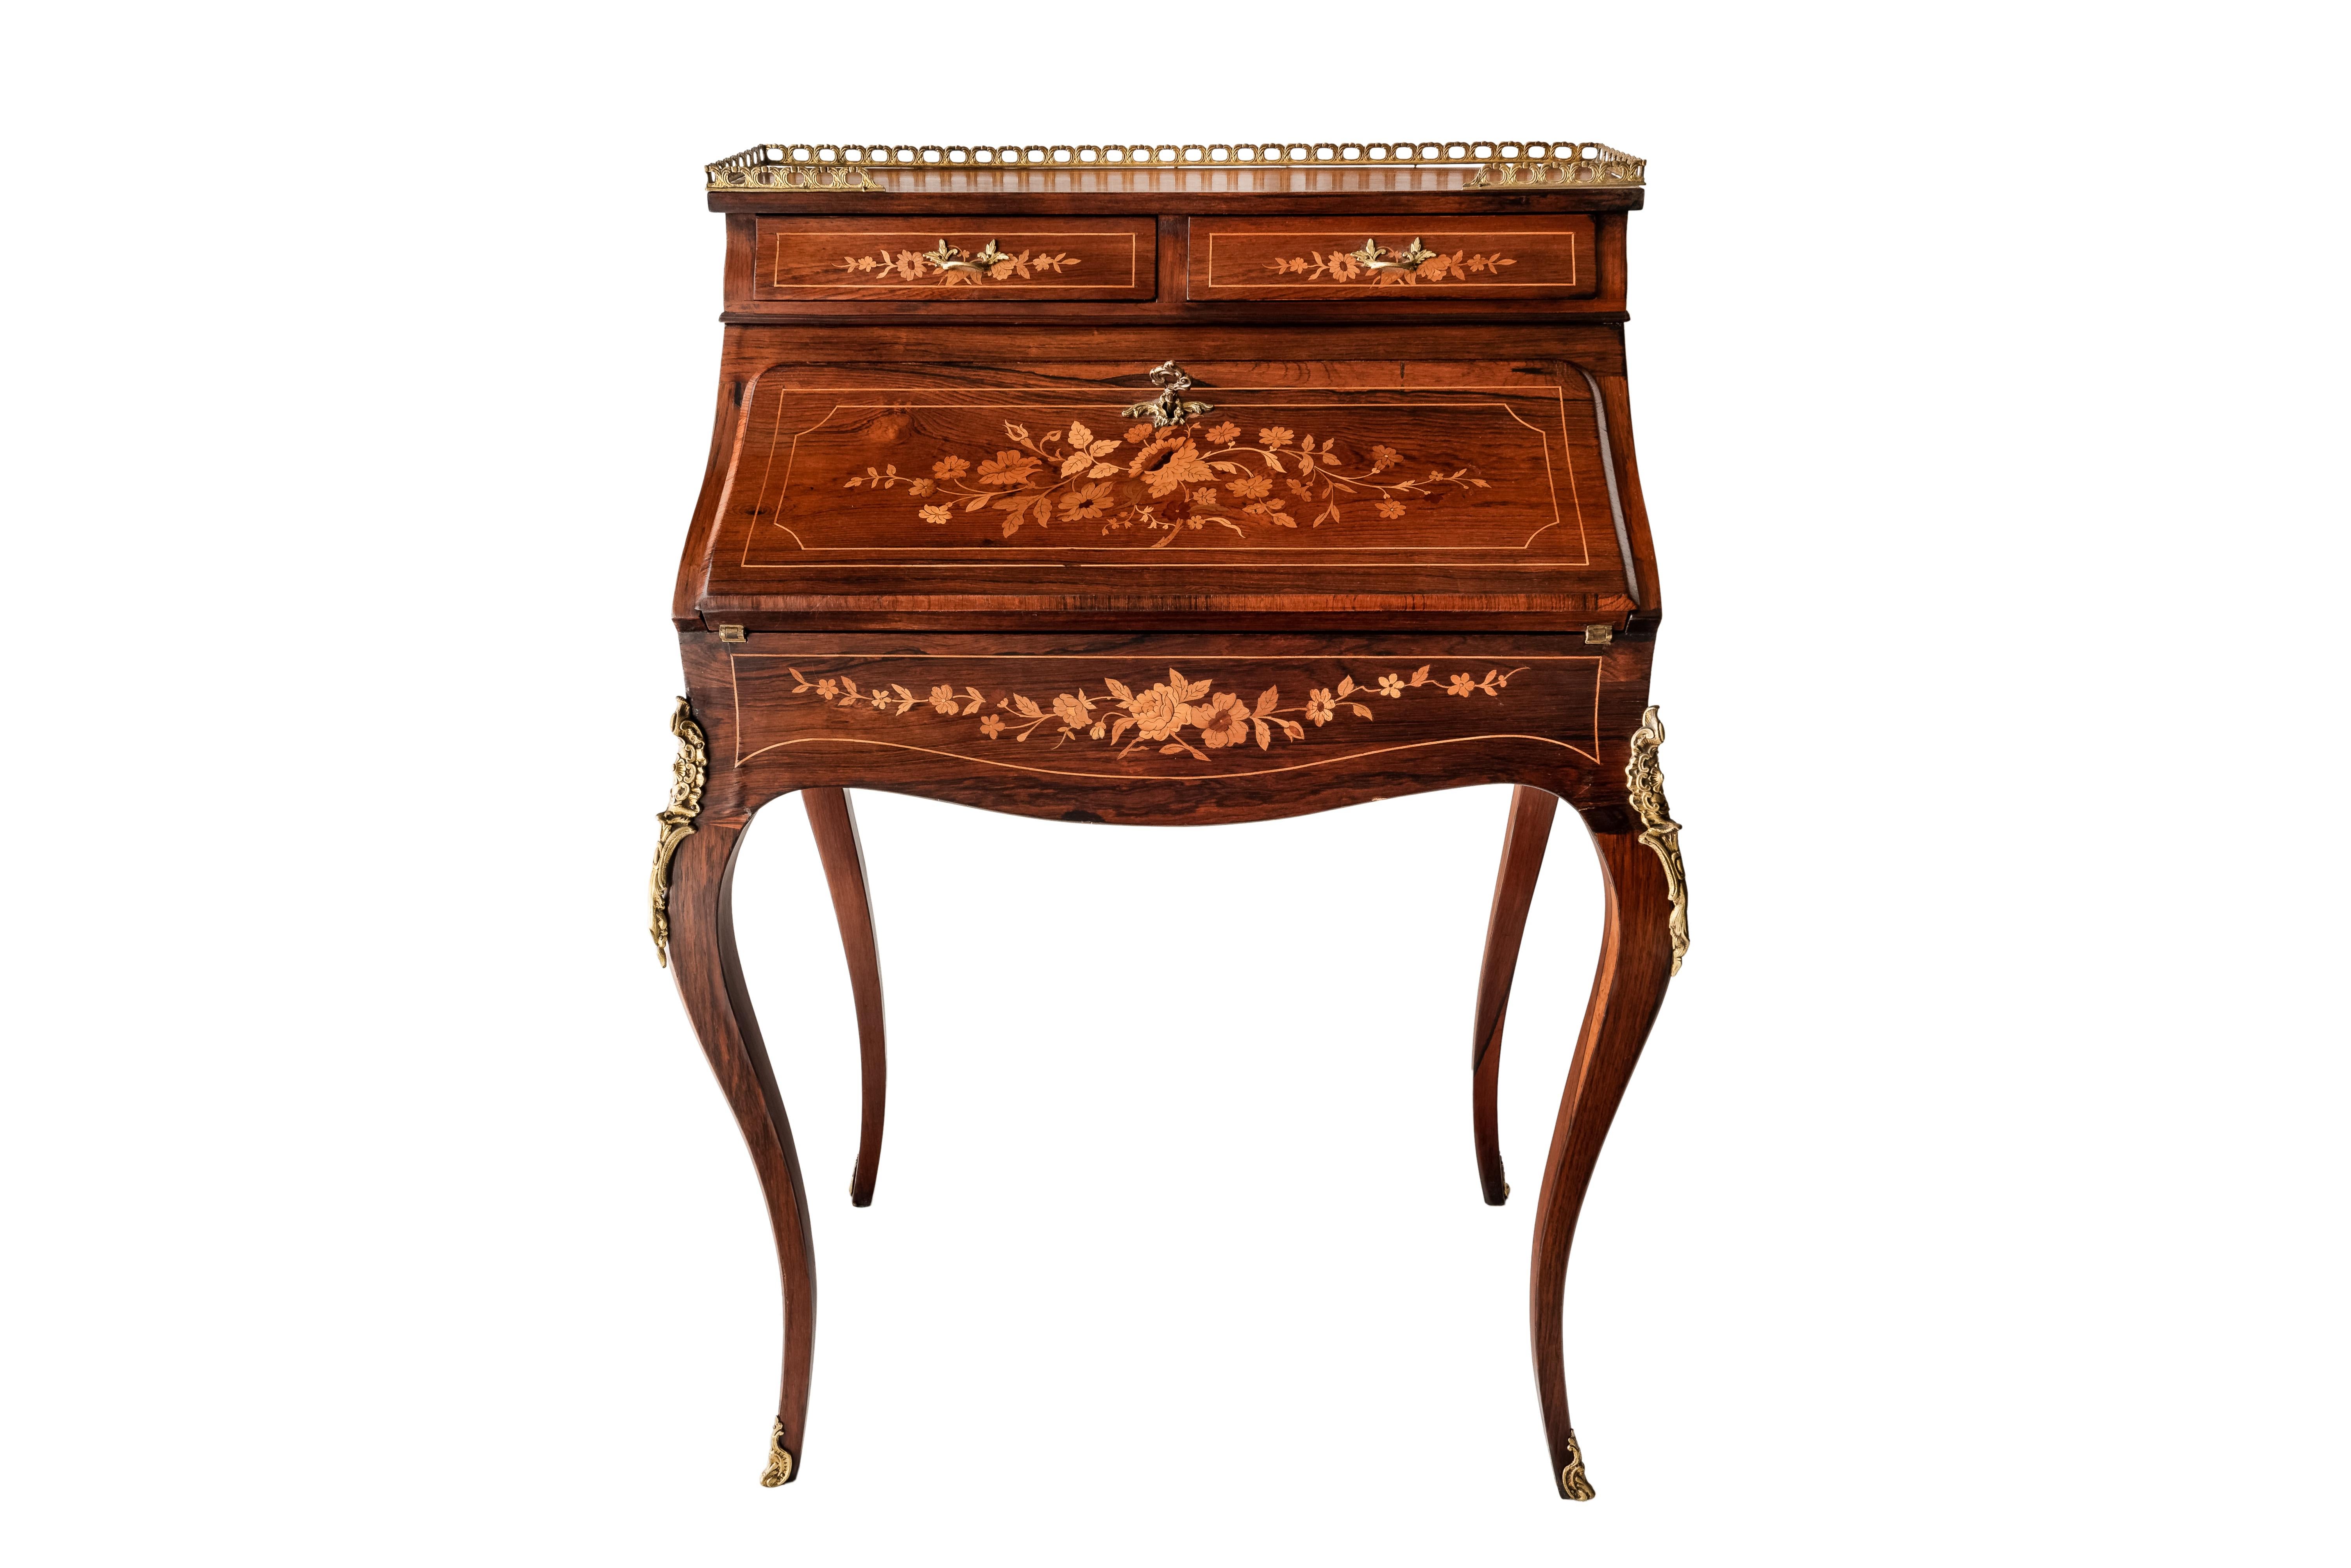 19th Century French Louis XV Style Marquetry Bureau Desk with Secret In Fair Condition For Sale In Matosinhos, PT